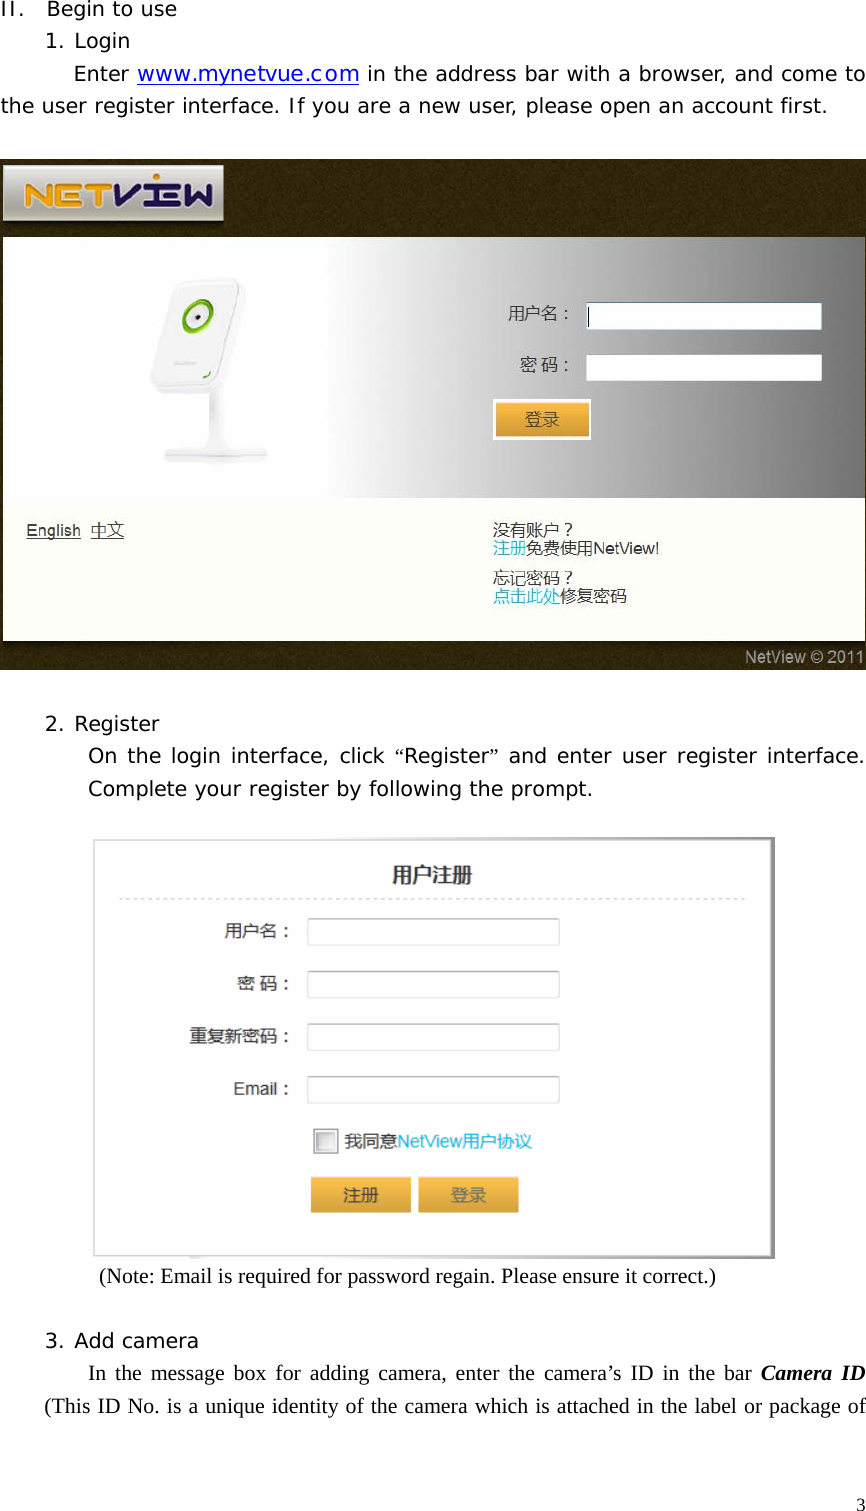  3II.  Begin to use 1. Login         Enter www.mynetvue.com in the address bar with a browser, and come to the user register interface. If you are a new user, please open an account first.    2. Register   On the login interface, click “Register” and enter user register interface. Complete your register by following the prompt.     (Note: Email is required for password regain. Please ensure it correct.)  3. Add camera  In the message box for adding camera, enter the camera’s ID in the bar Camera ID (This ID No. is a unique identity of the camera which is attached in the label or package of 